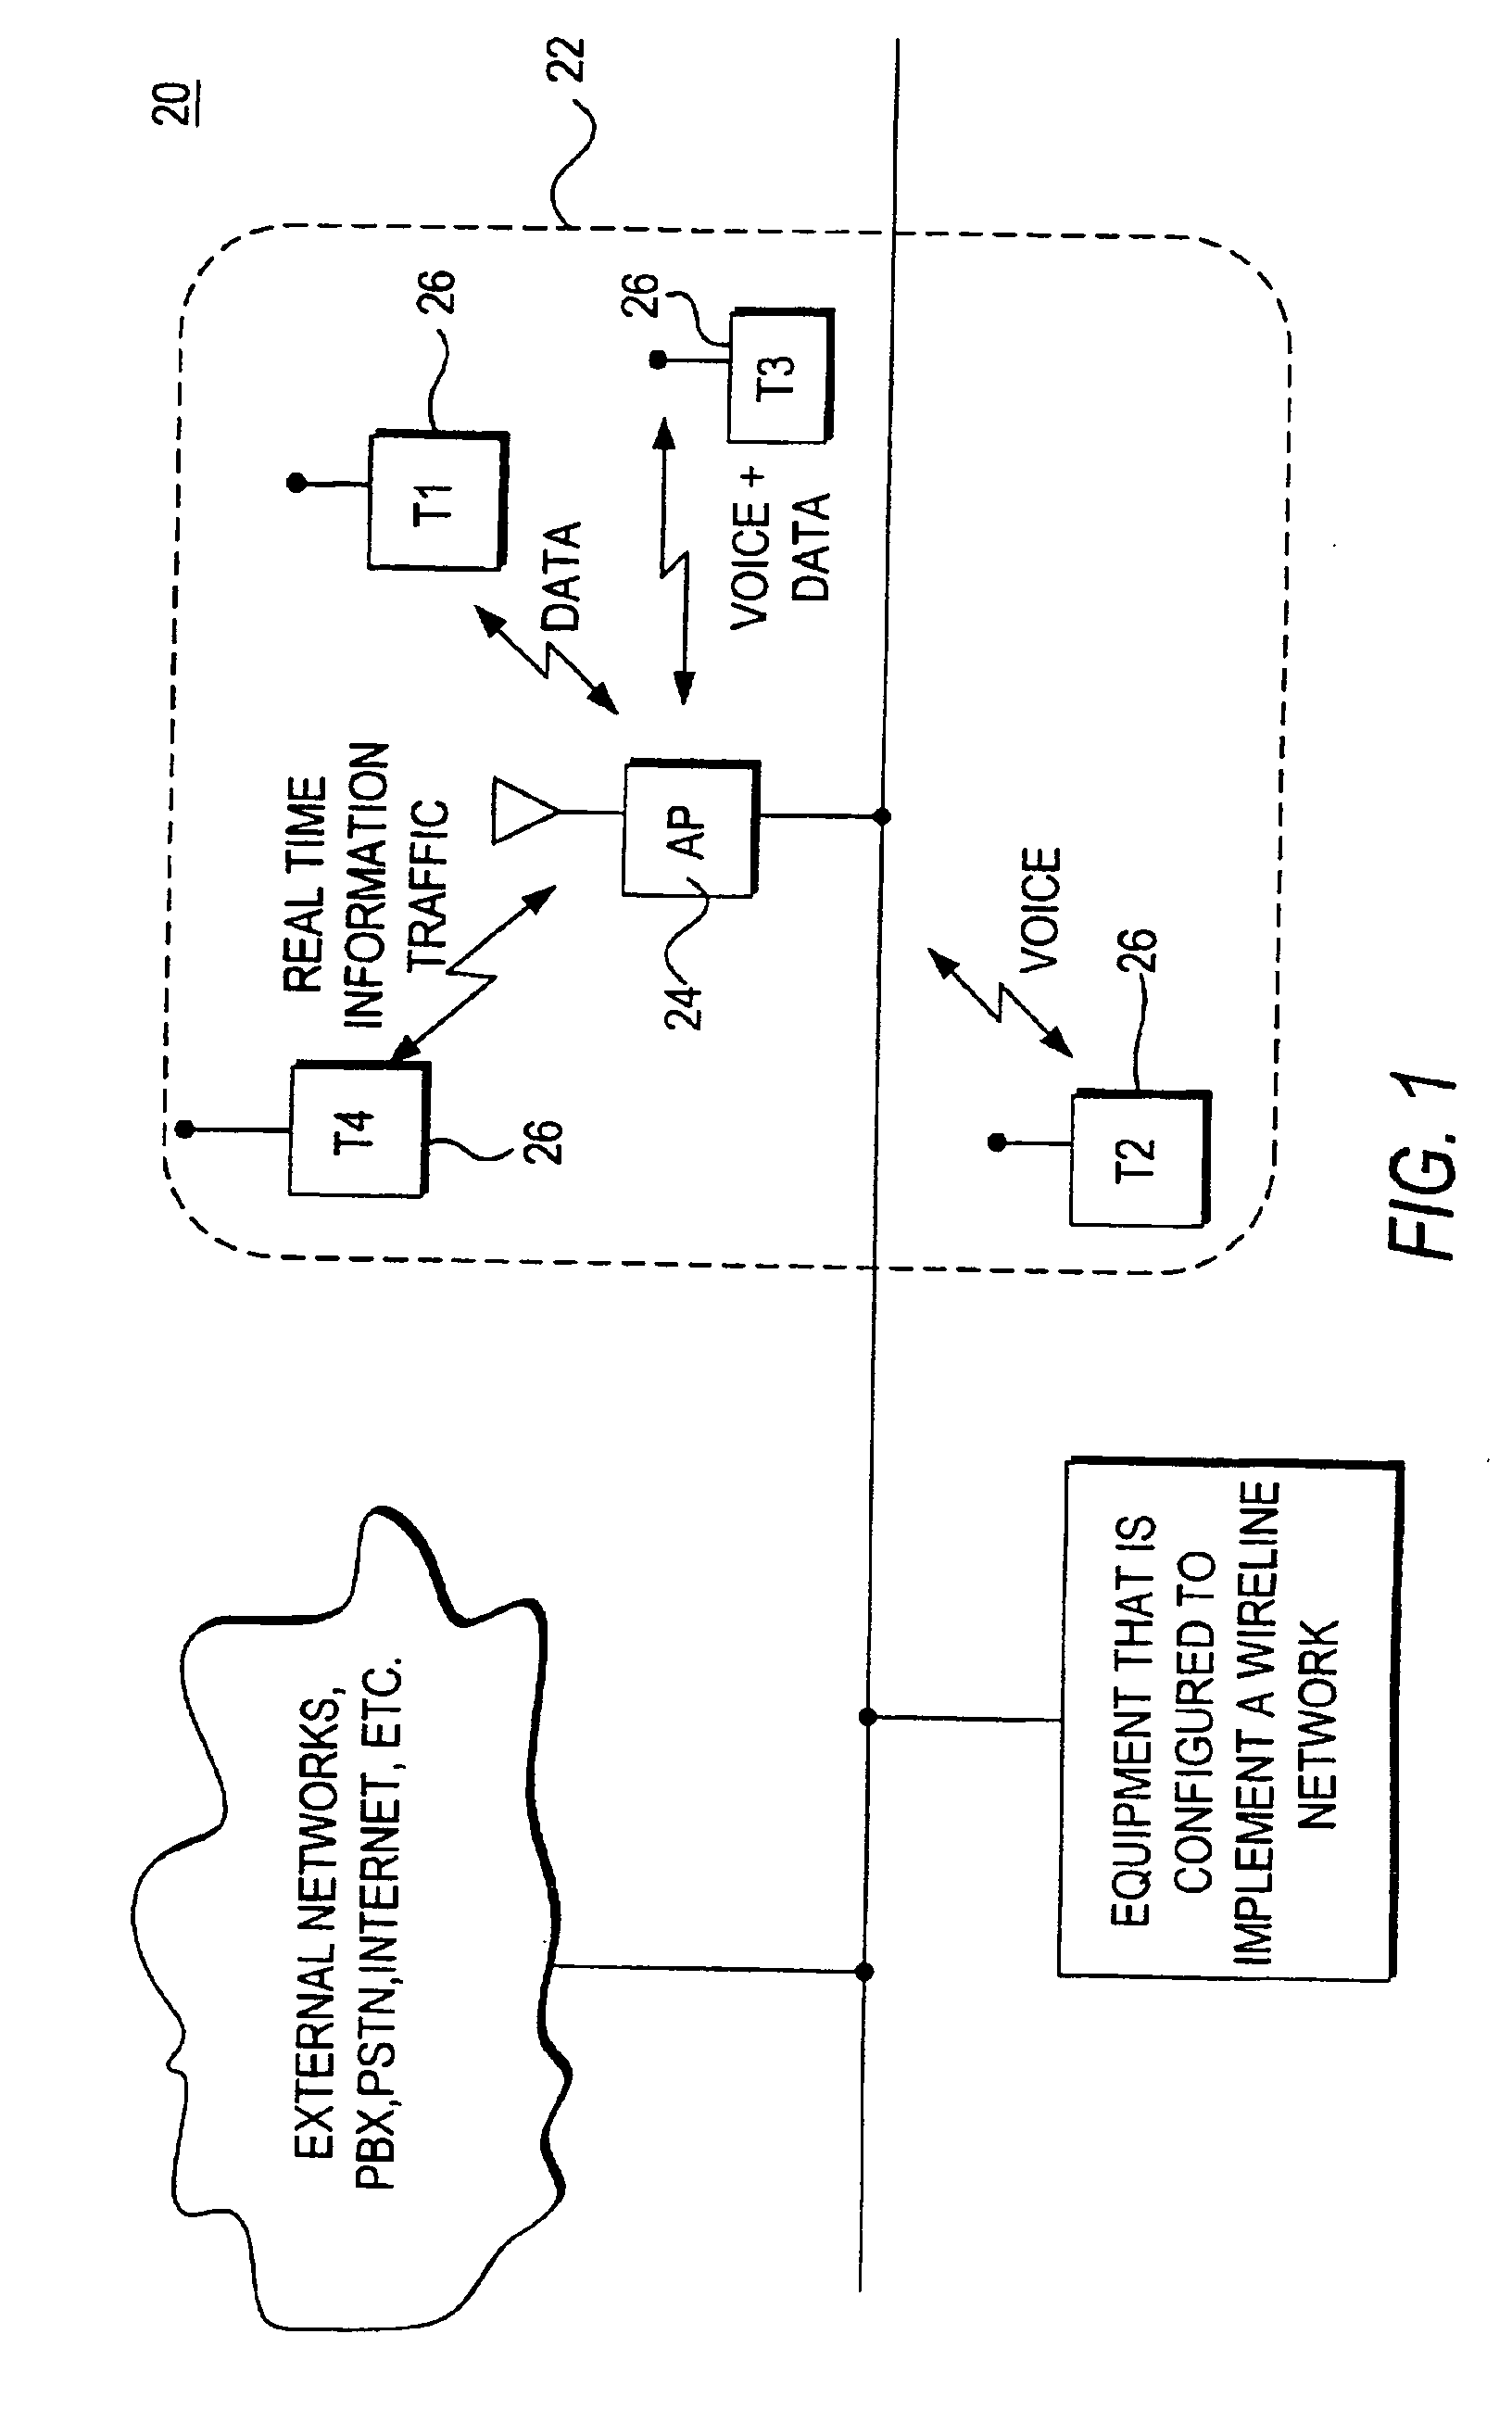 Voice and data wireless communications network and method